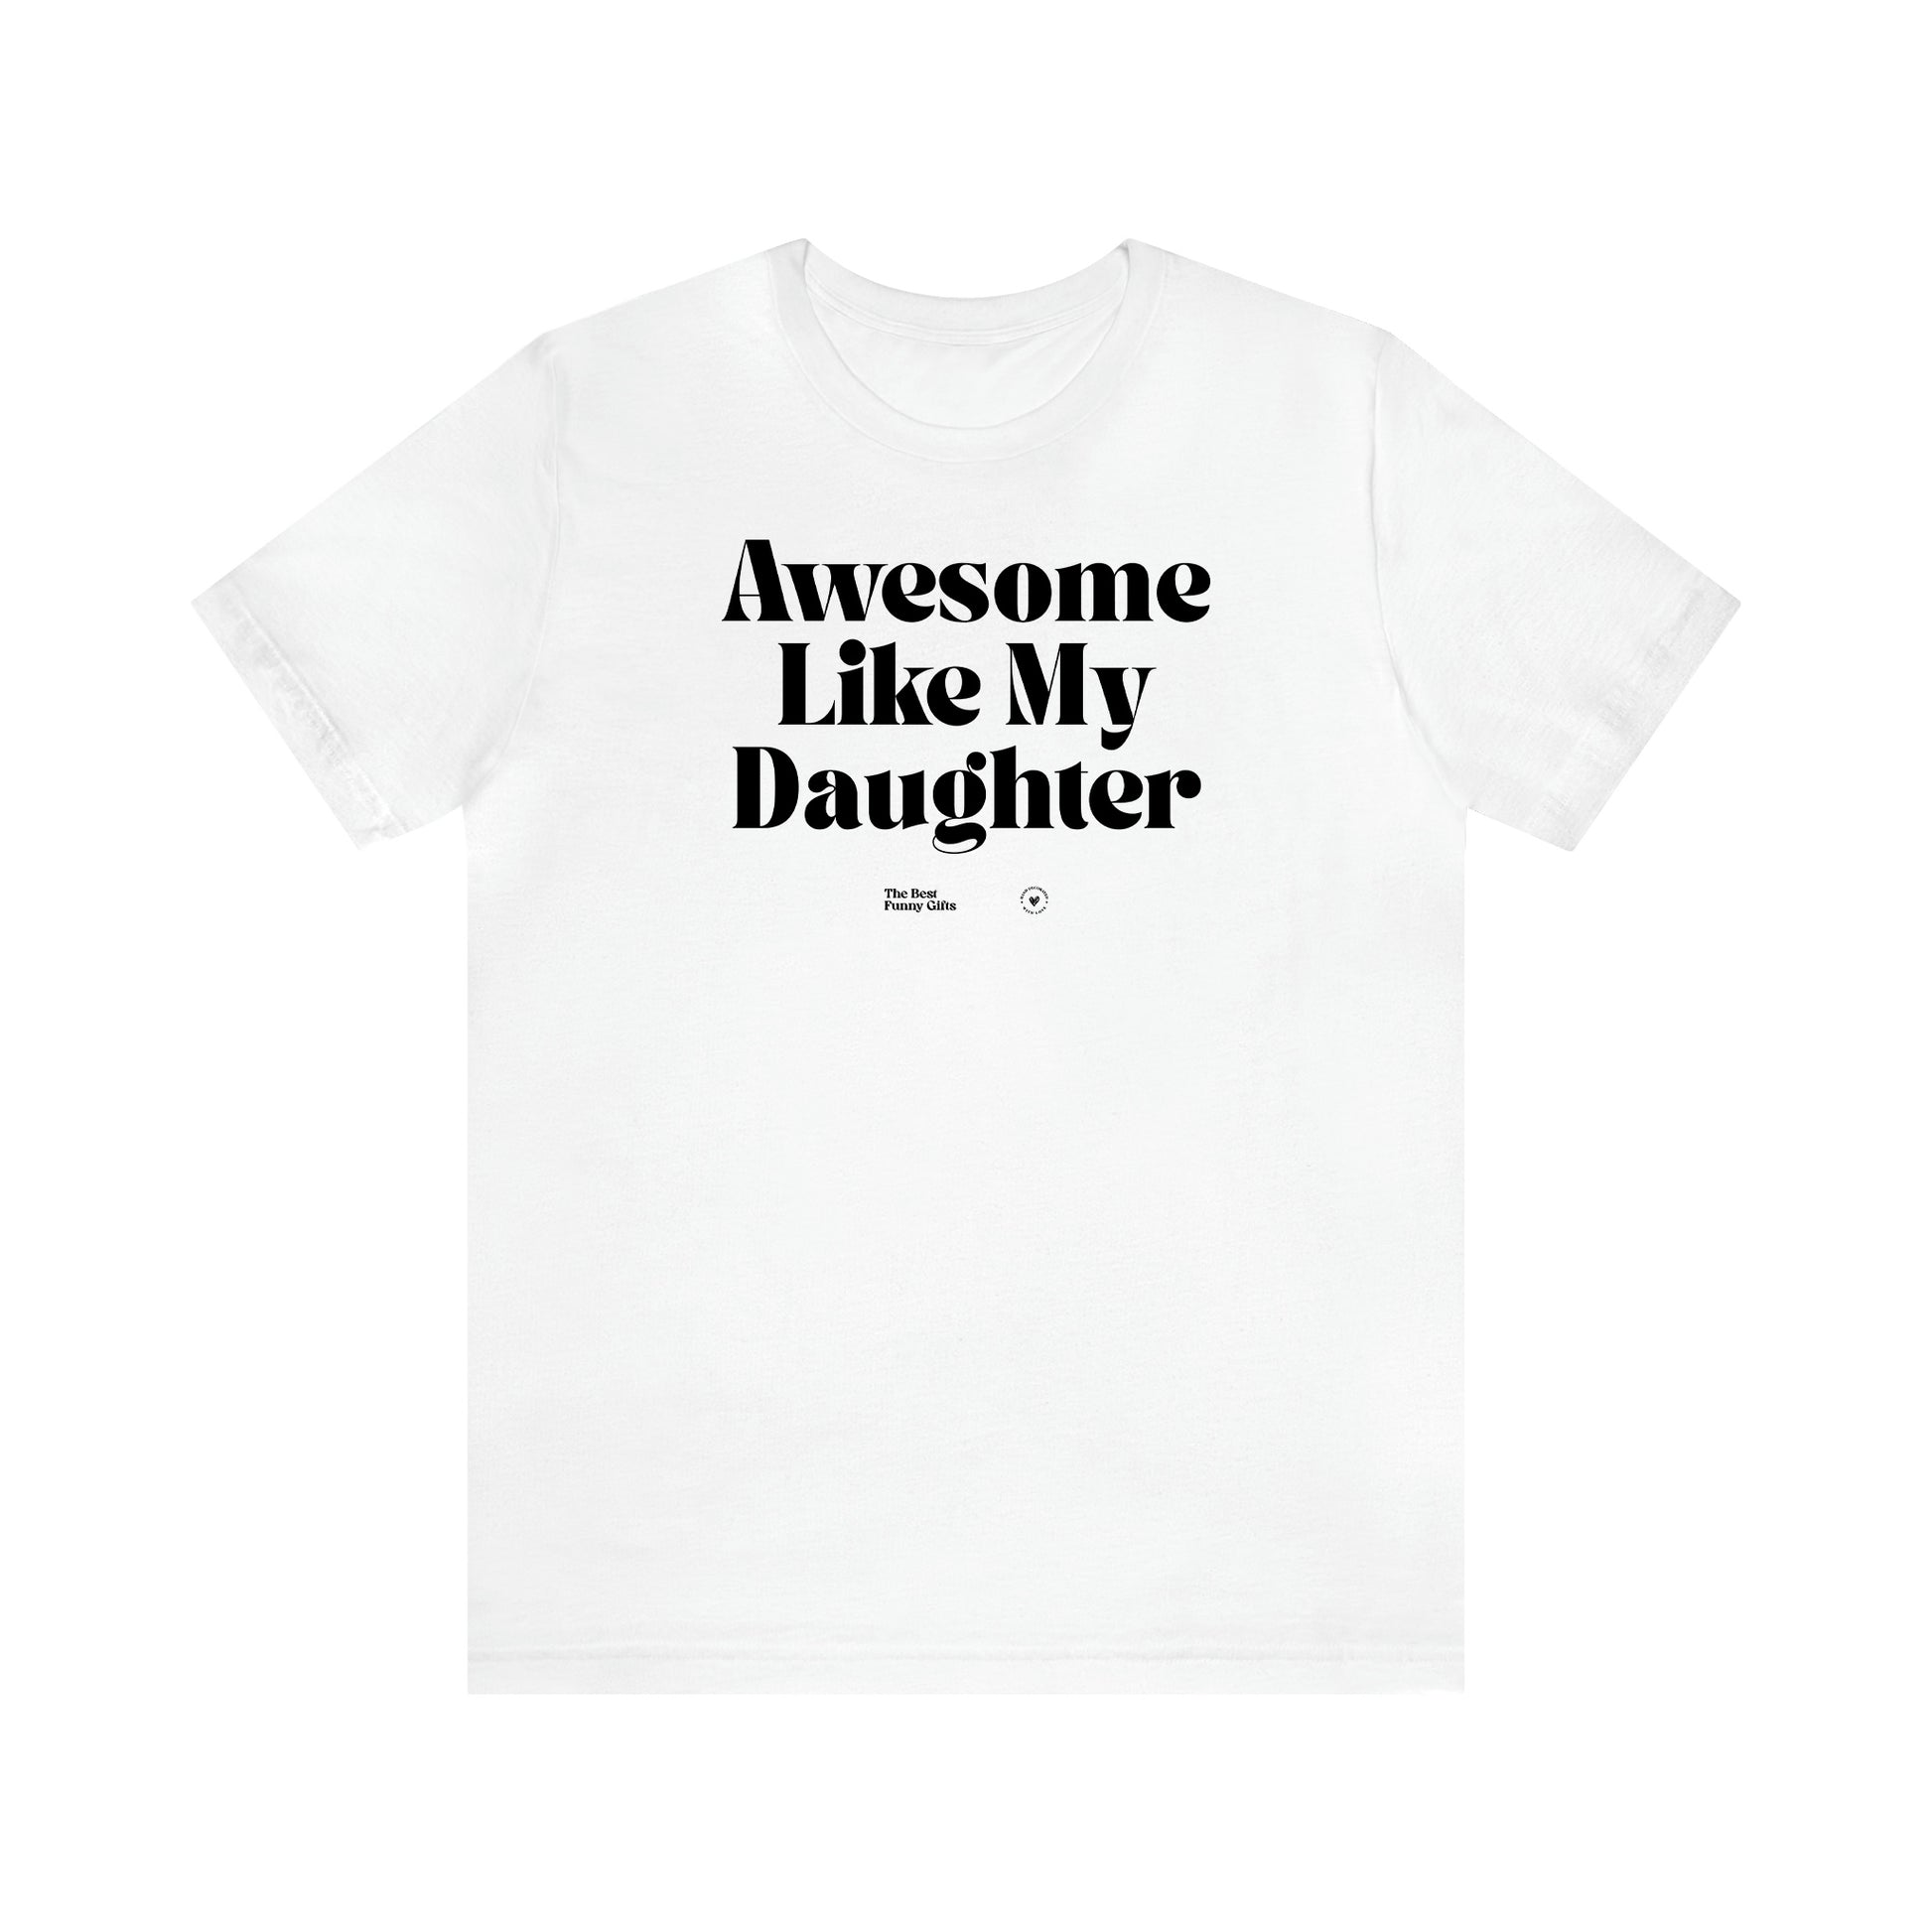 Women's T Shirts Awesome Like My Daughter - The Best Funny Gifts